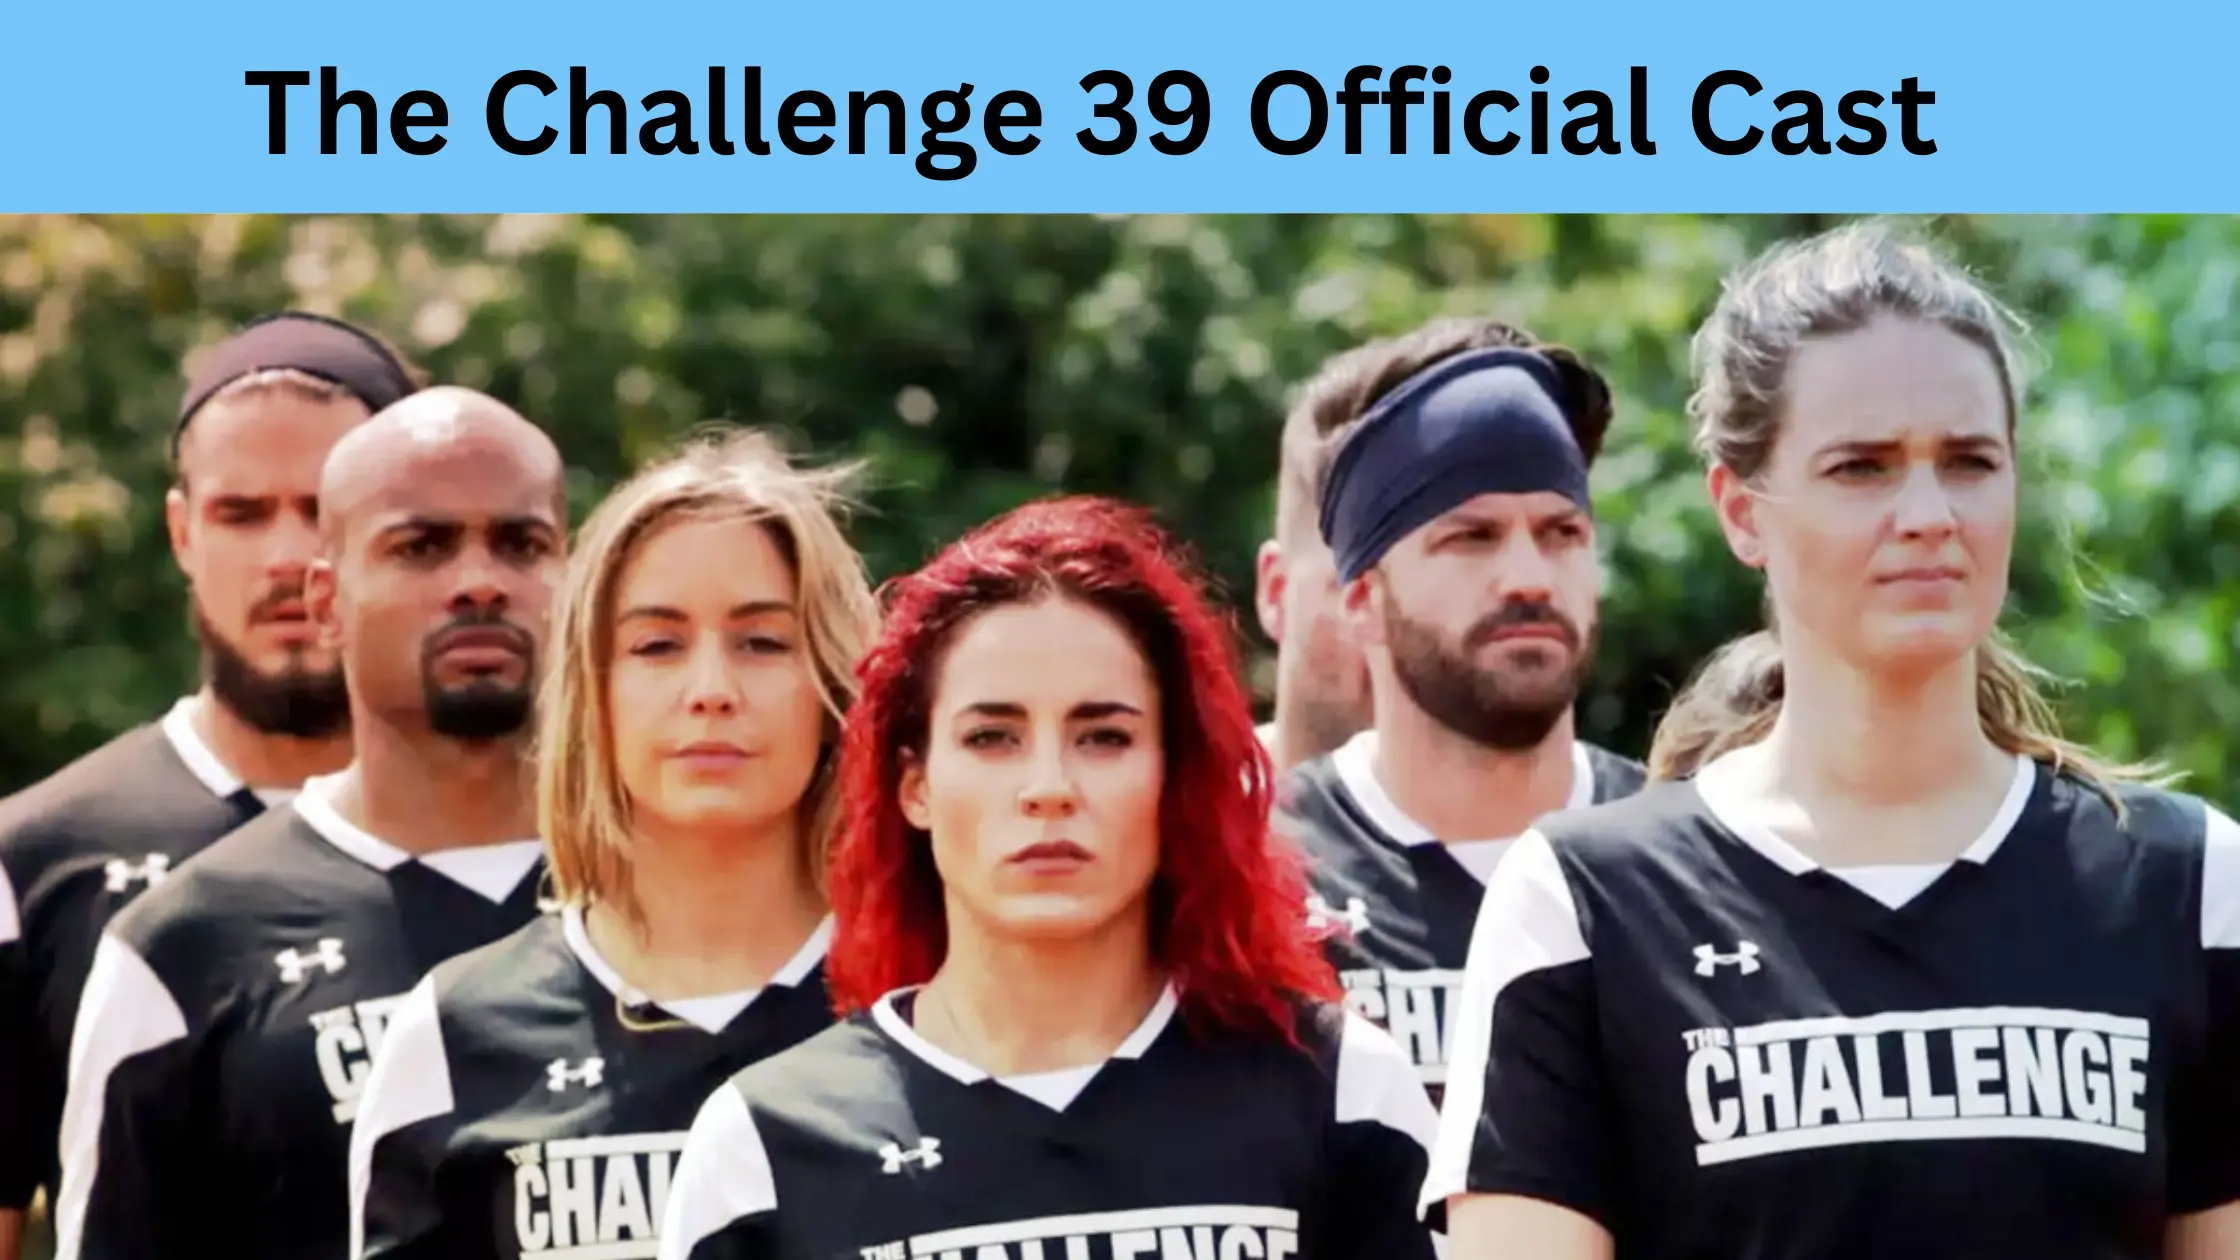 The Challenge Season 39 Official Cast